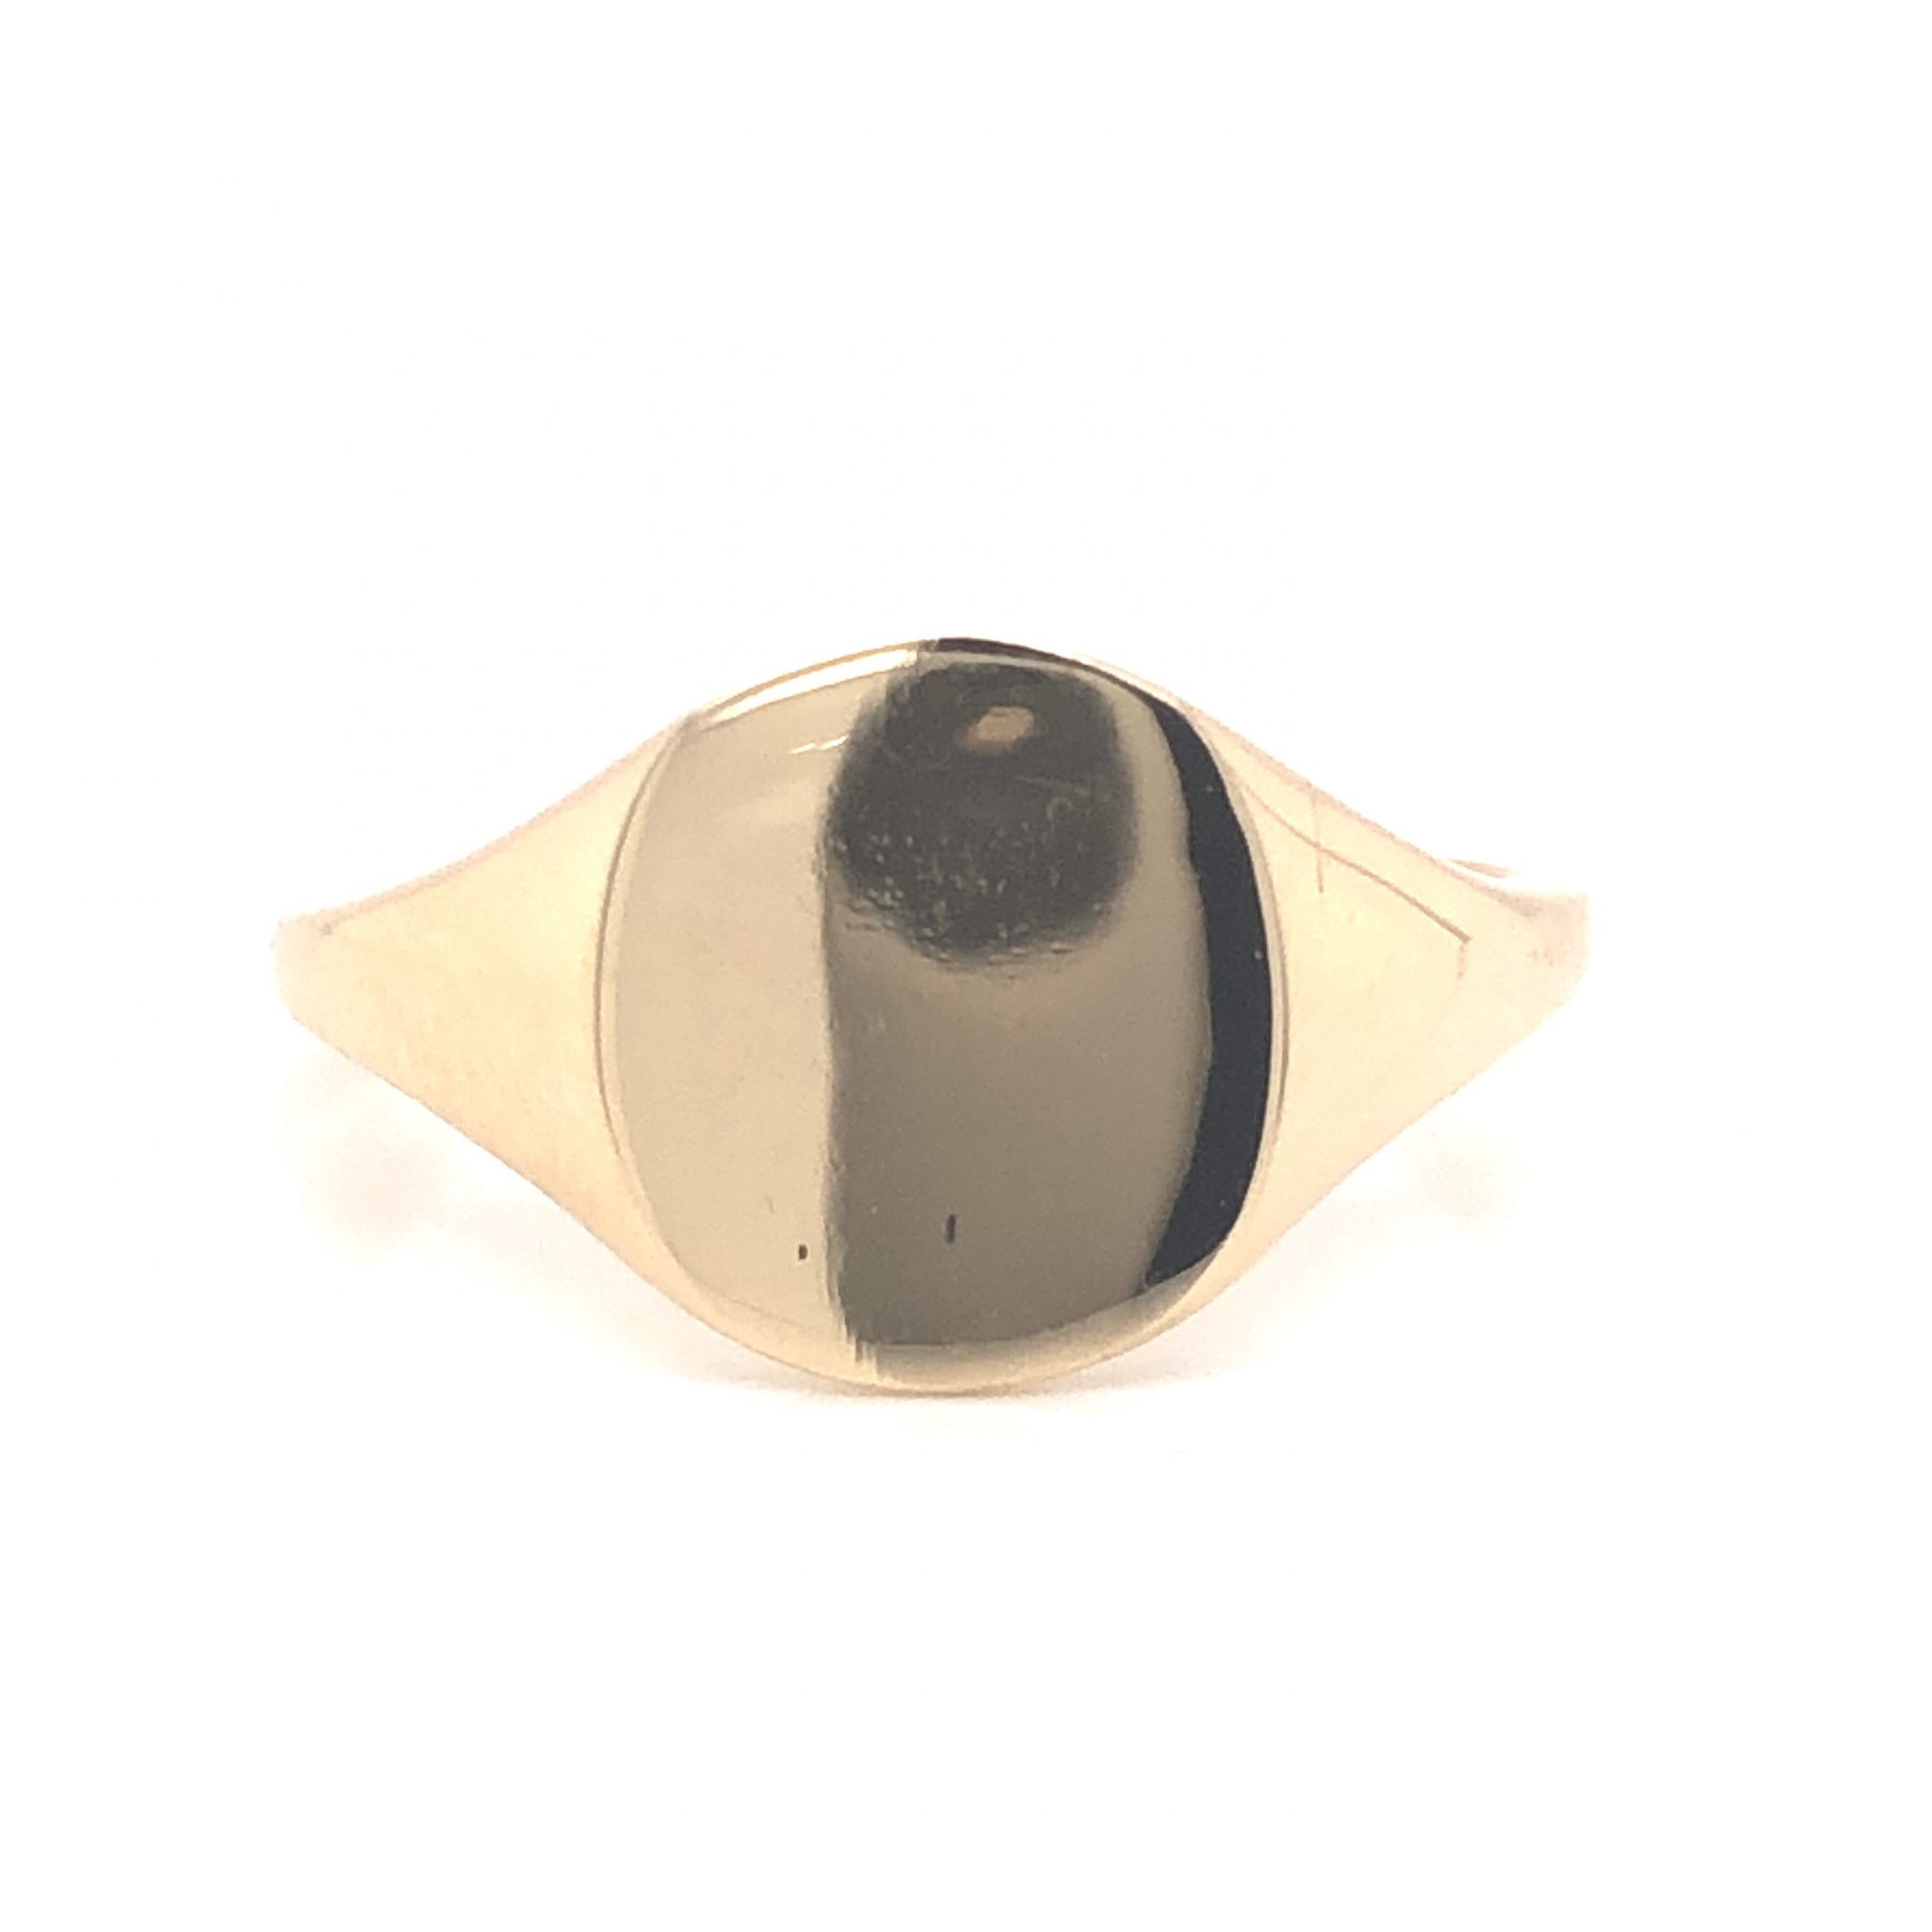 Modern Oval Signet Ring in 14k Yellow GoldComposition: Platinum Ring Size: 7 Total Gram Weight: 4.2 g Inscription: 14k
      